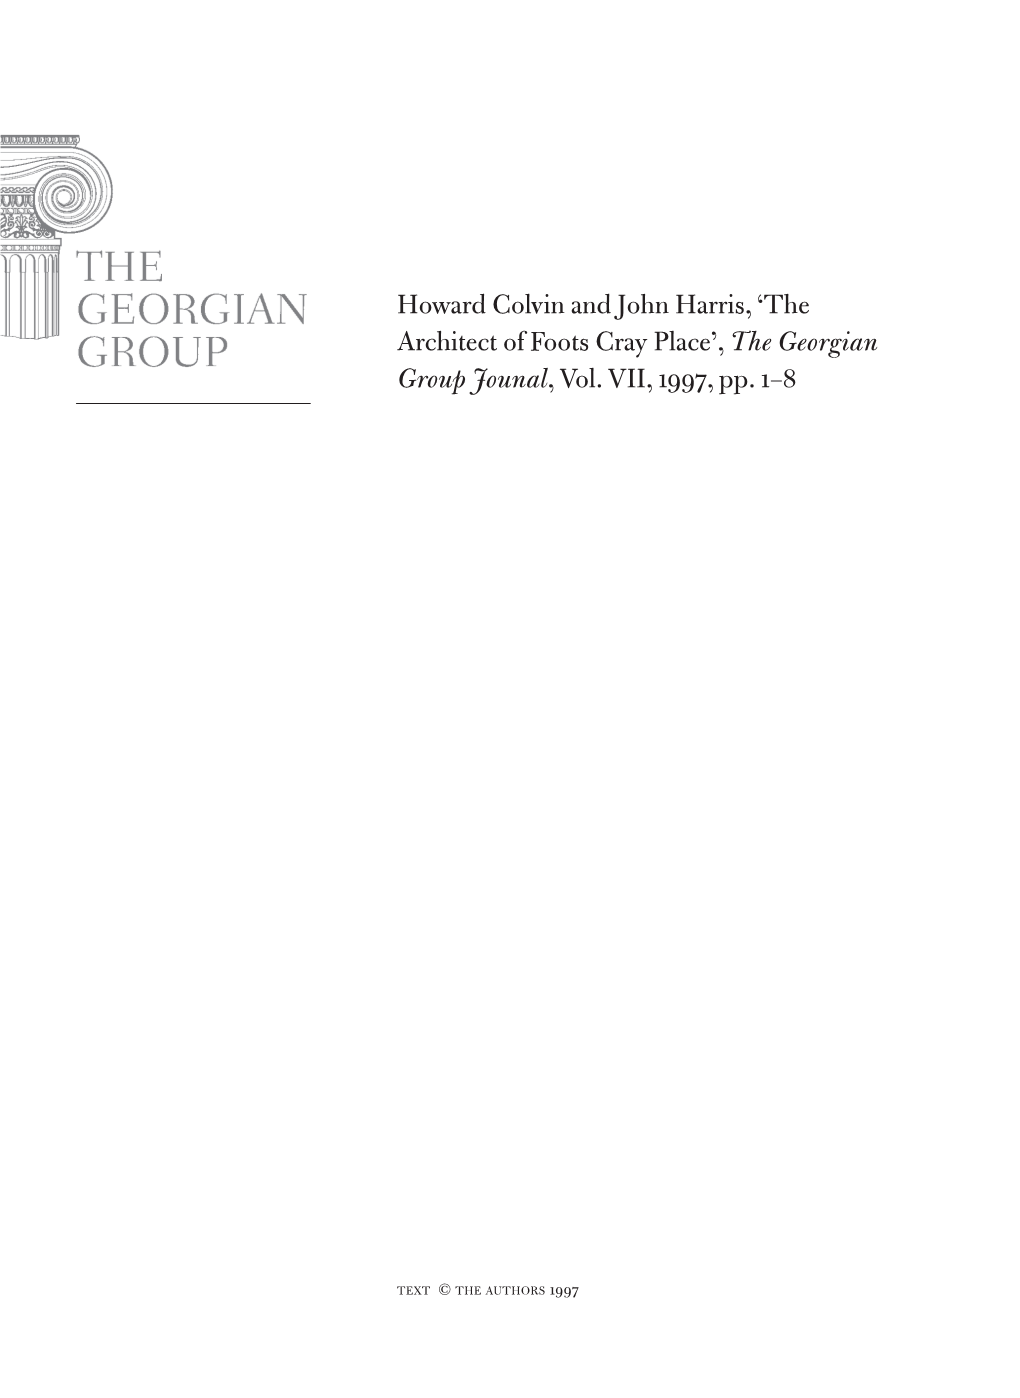 Howard Colvin and John Harris, 'The Architect of Foots Cray Place', the Georgian Group Jounal, Vol. VII, 1997, Pp